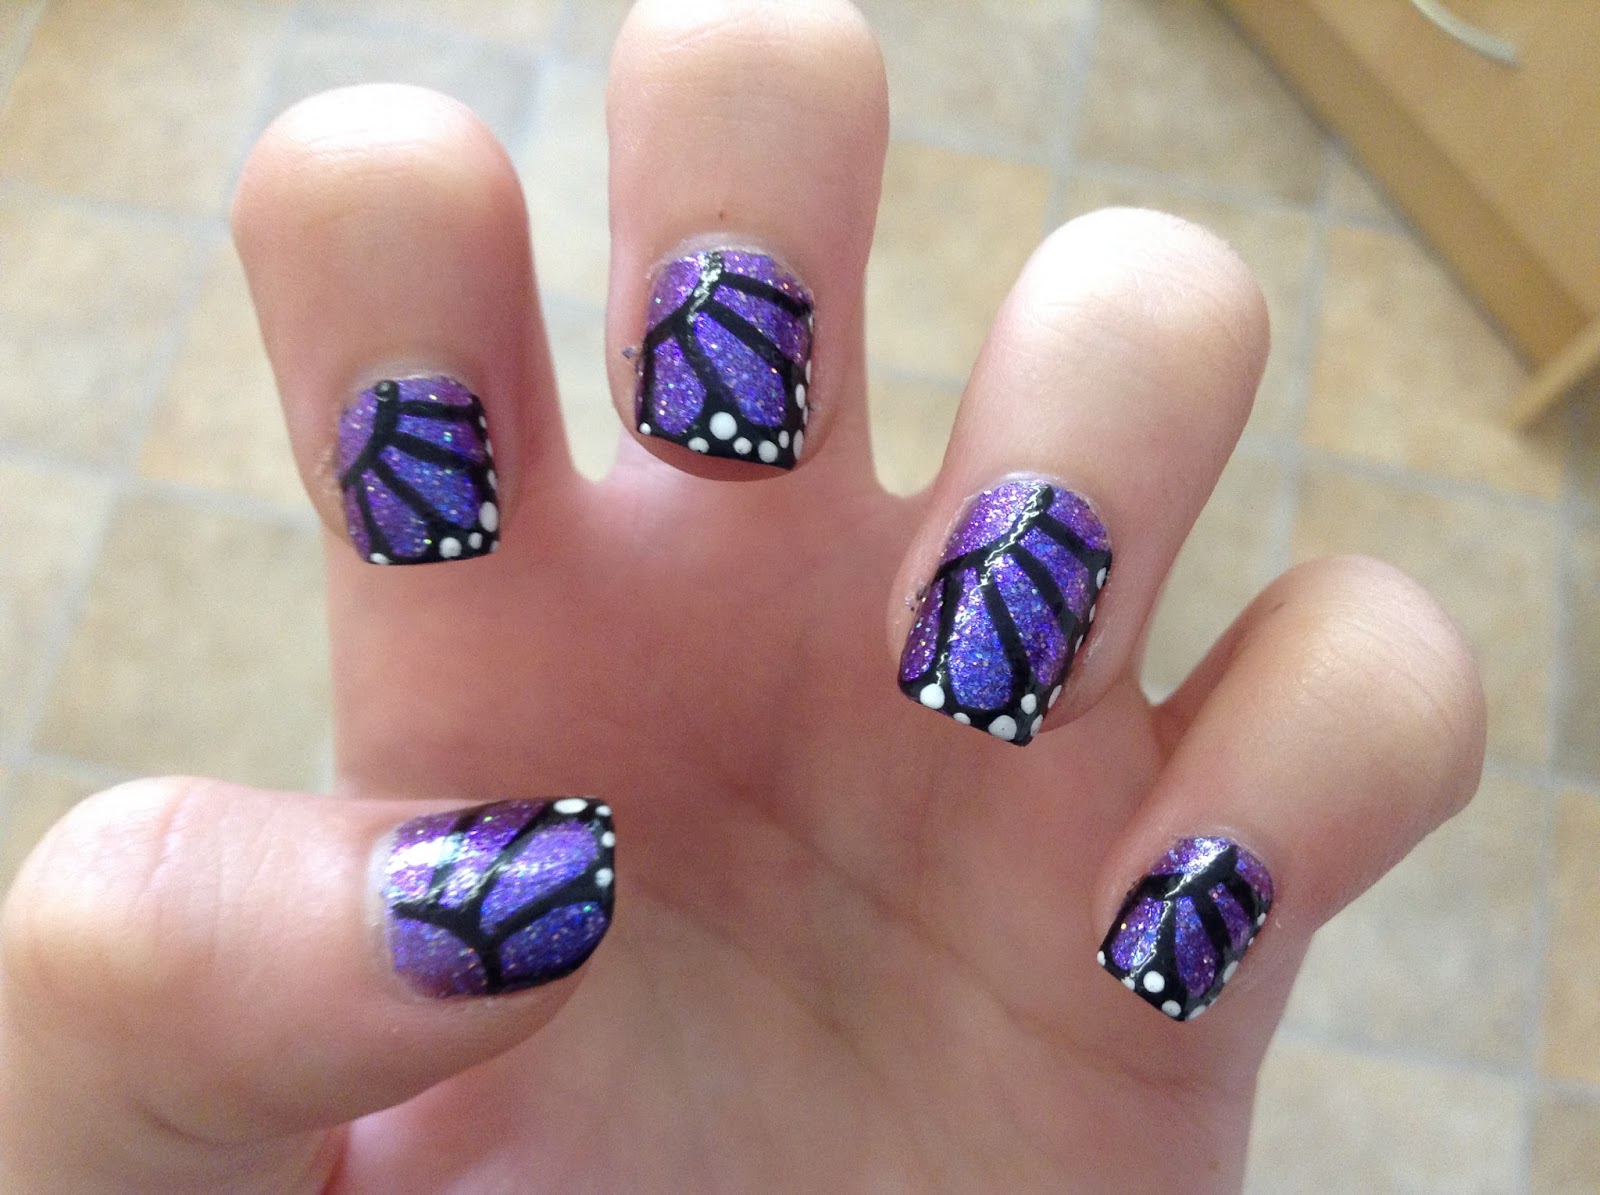 2. Butterfly Nail Art Designs - wide 7